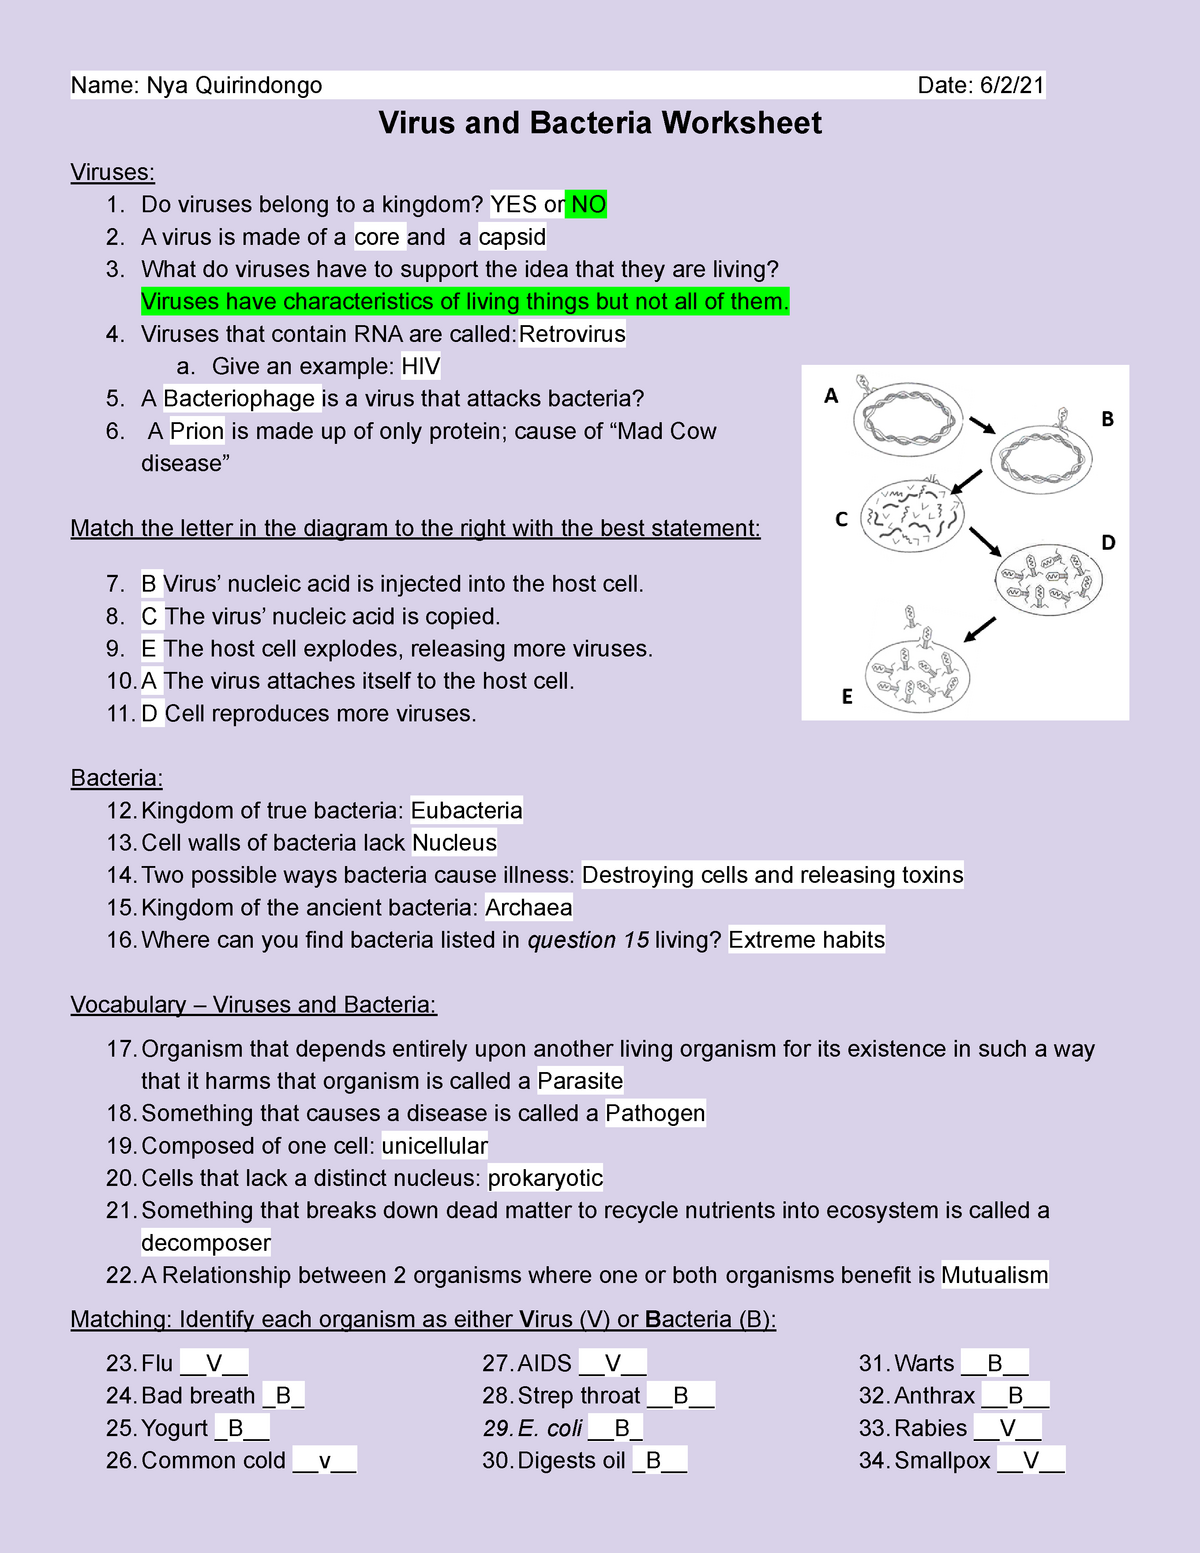 Copy of Virus and Bacteria Worksheet - BIO20 - General Biology Pertaining To Virus And Bacteria Worksheet Answers